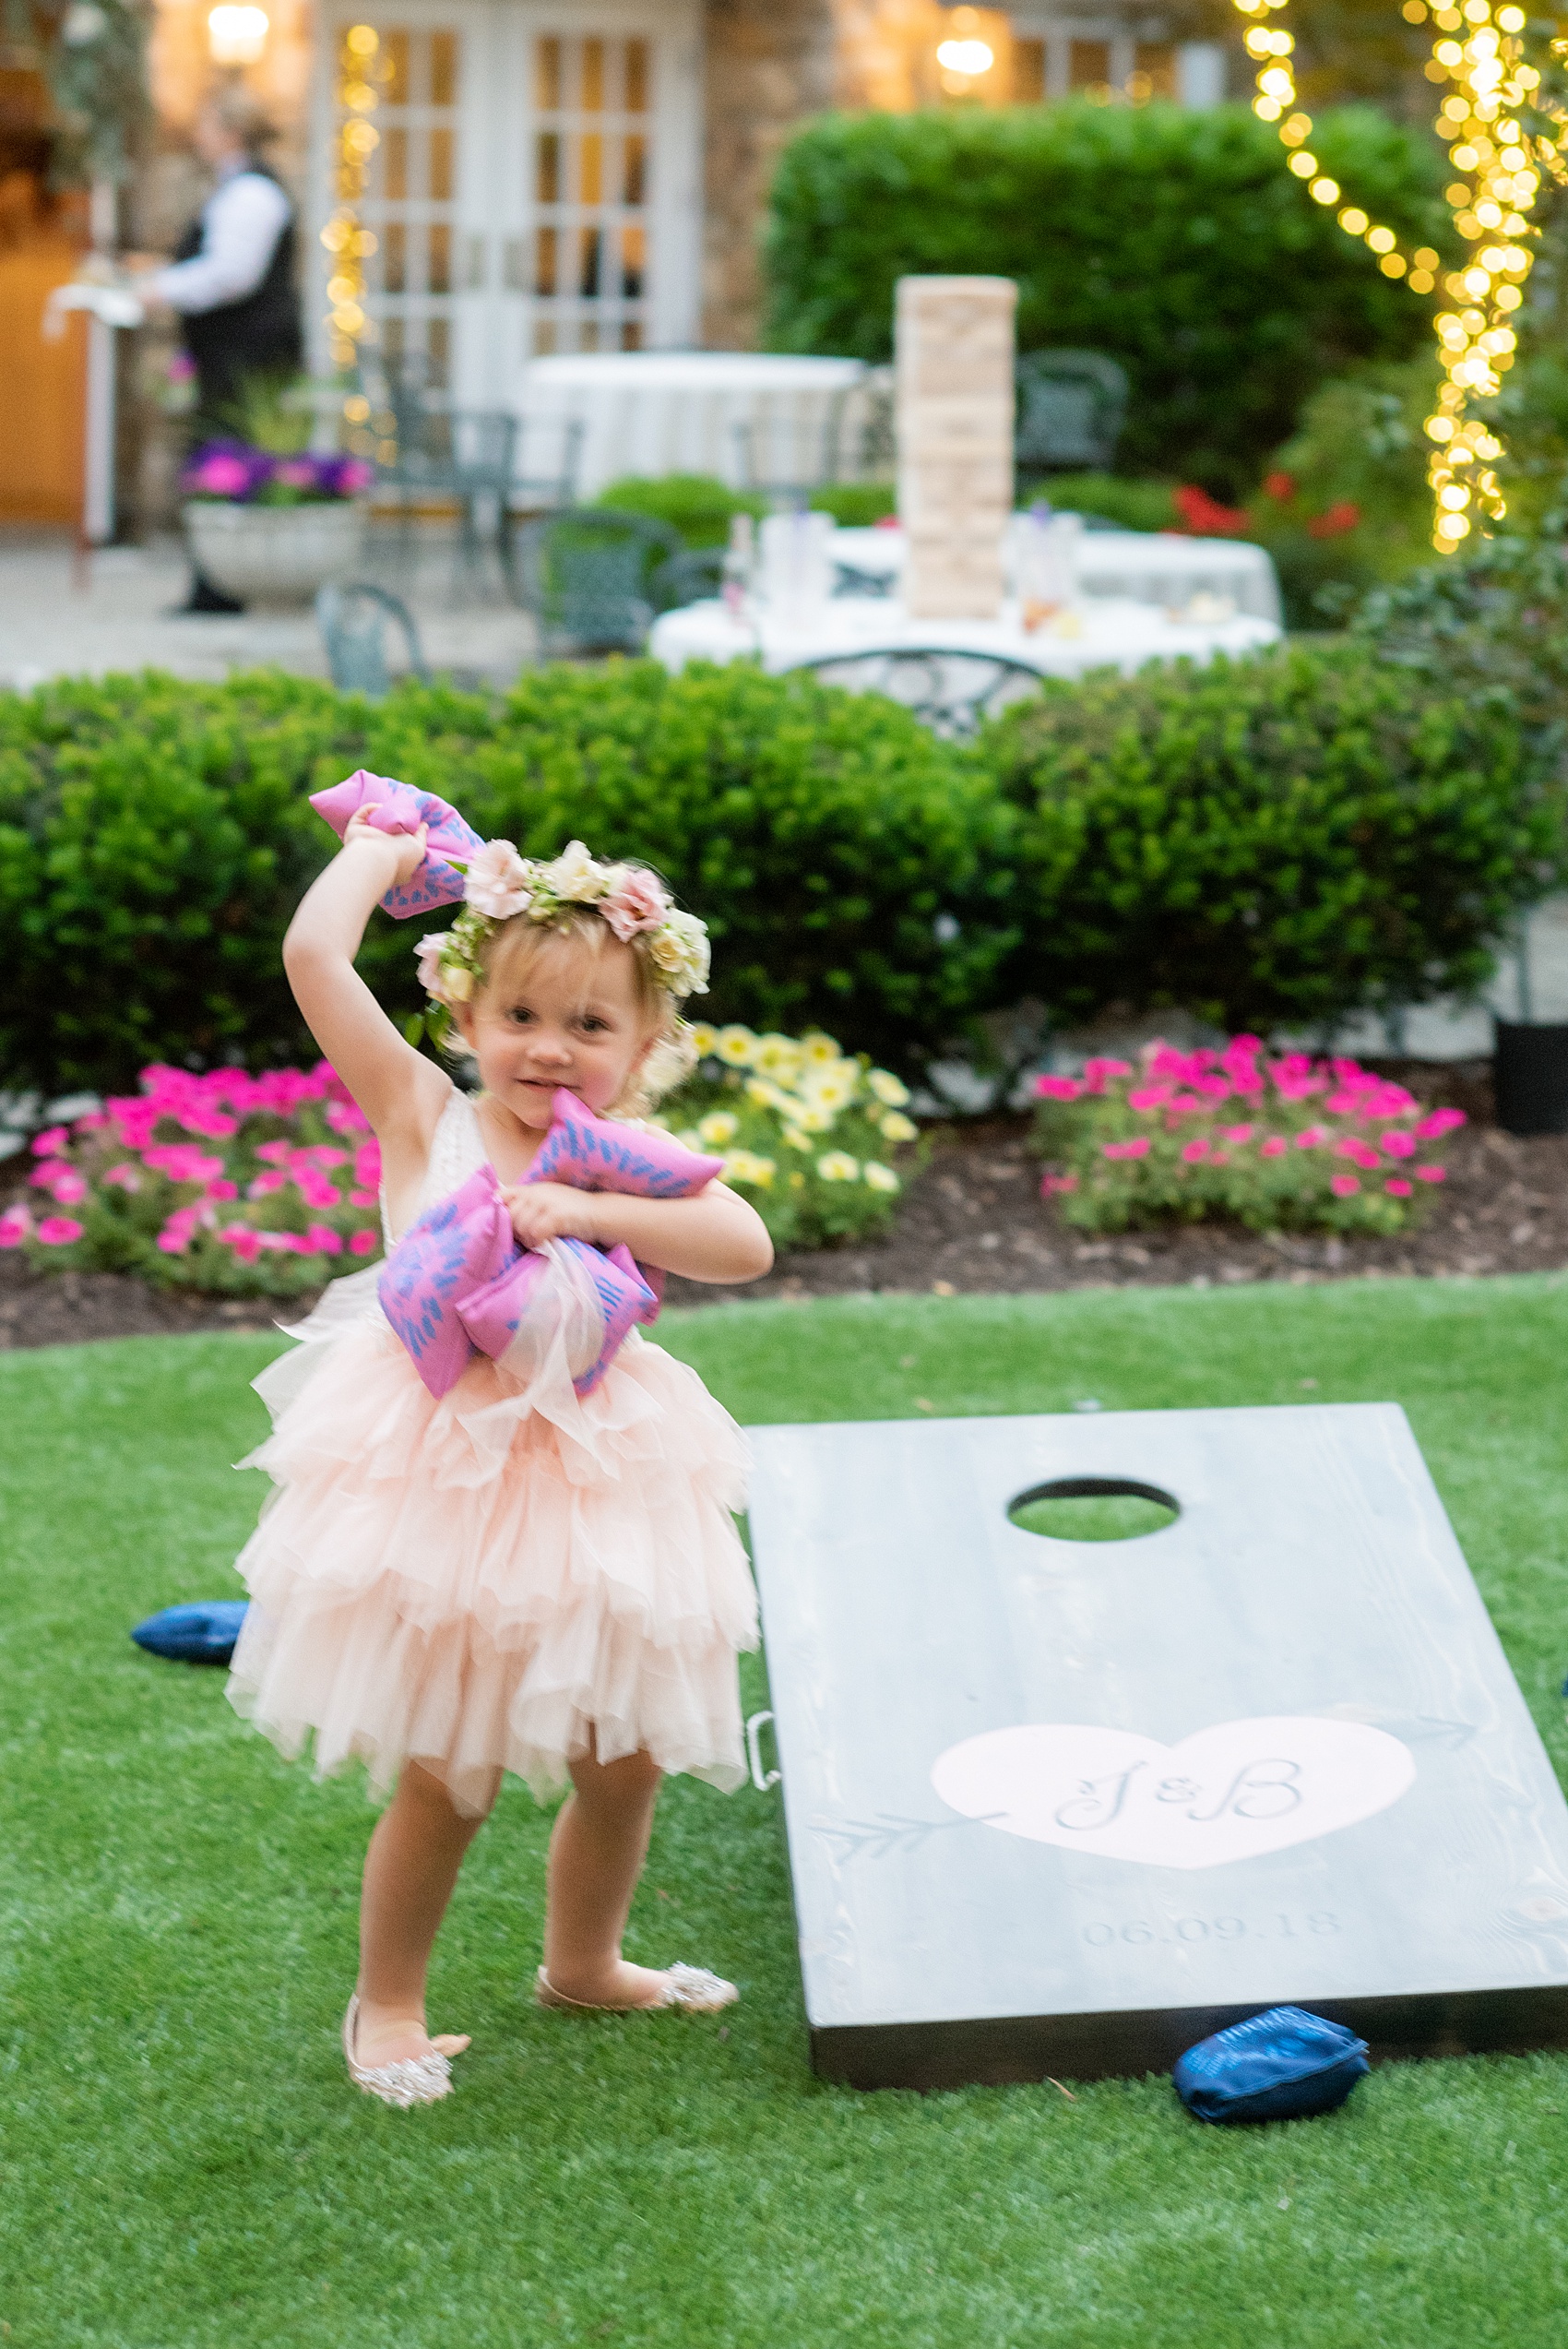 A June wedding at Olde Mill Inn, NJ. Photos by Mikkel Paige Photography for an event with pink details. This New Jersey venue is a great option for something not too far from NYC. Their custom corn hole boards matched their wedding logo and signature heart! Even the flower girl enjoyed playing during cocktail hour! Click through for their complete wedding recap! #OldeMillInn #NJwedding #NJweddingphotographer #mikkelpaige #NewJerseyWeddingVenue #NewJerseyWedding #cornhole #customweddingdetails #weddinglogo #uniqueweddingdetails #MidsummerNightsDream